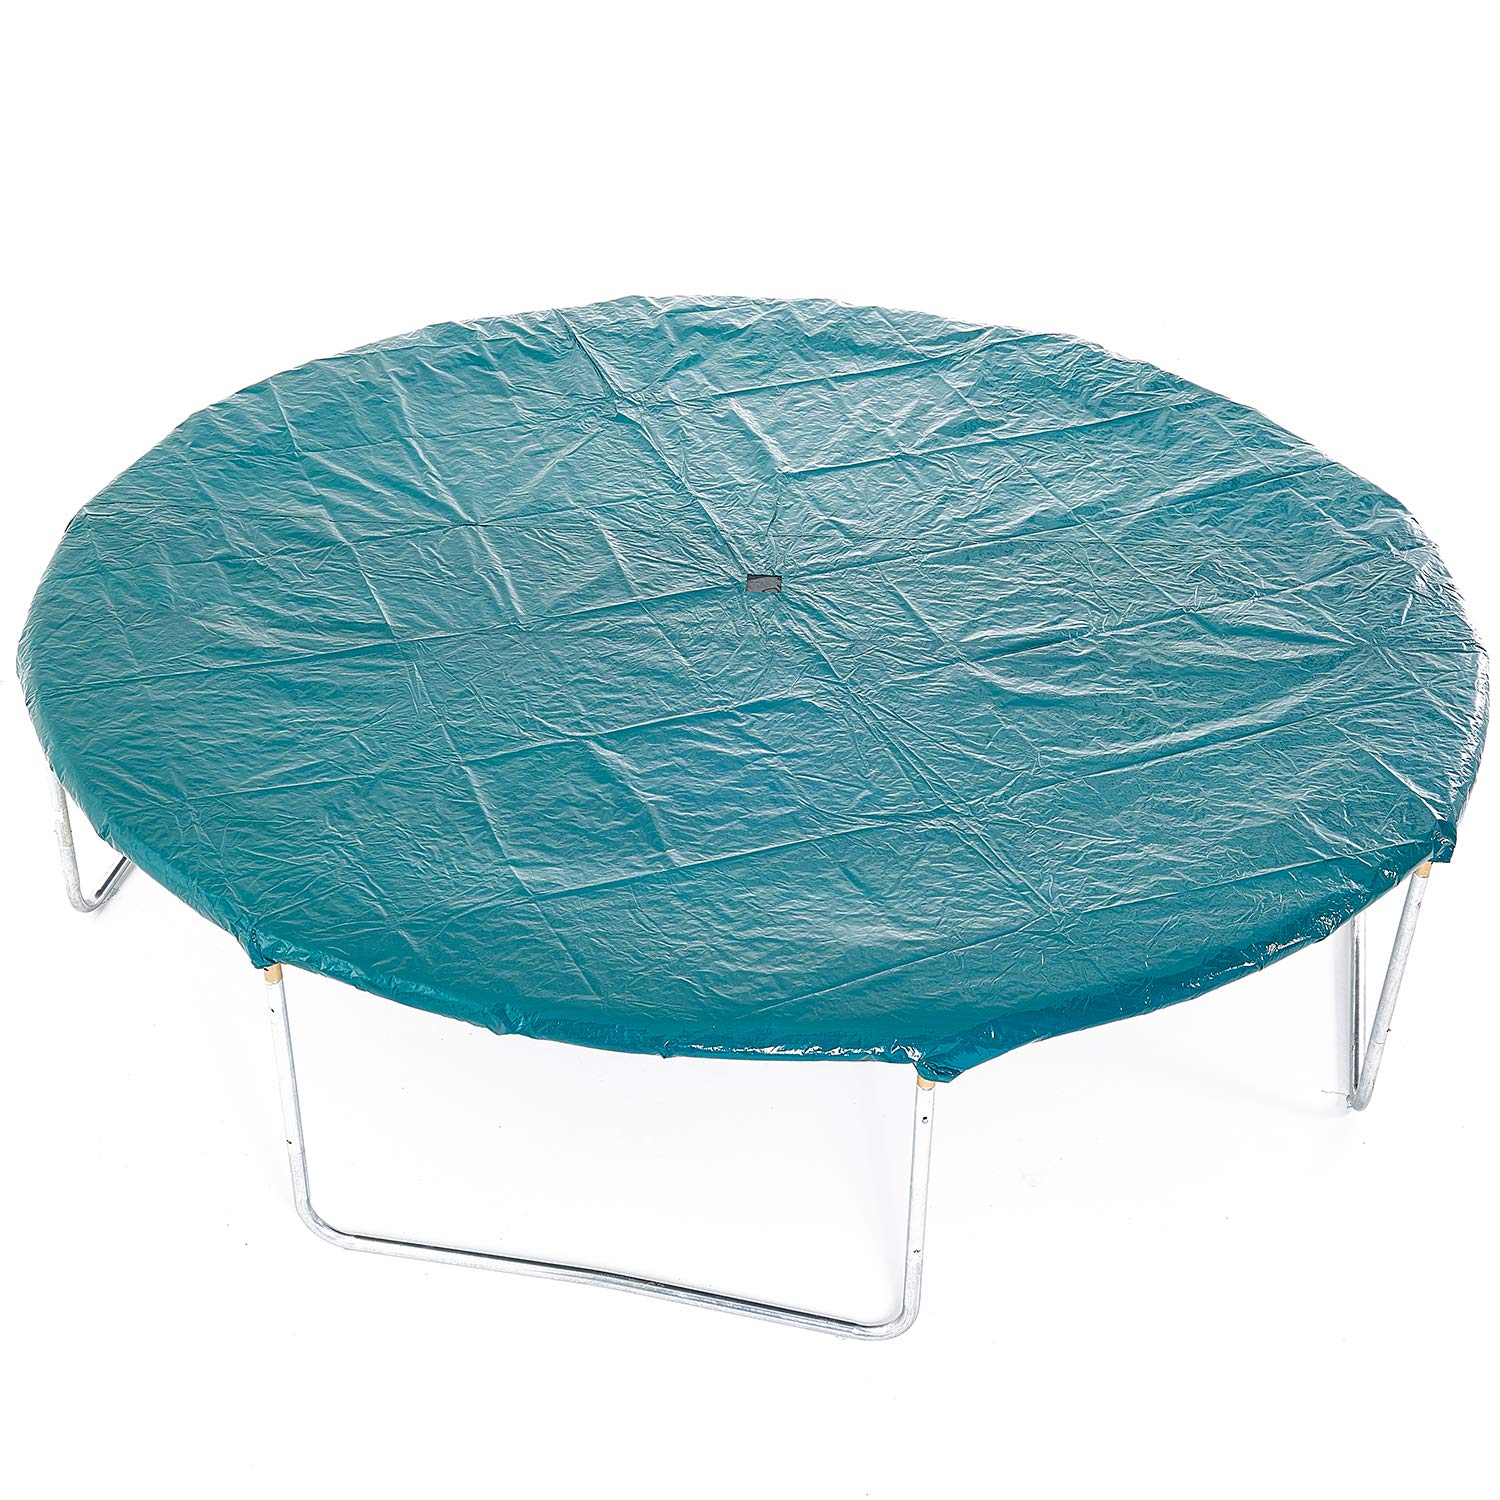 Skyhigh 8ft 10ft 12ft 14ft Trampoline Cover Weather and Rain Protection. Secure even in High Winds